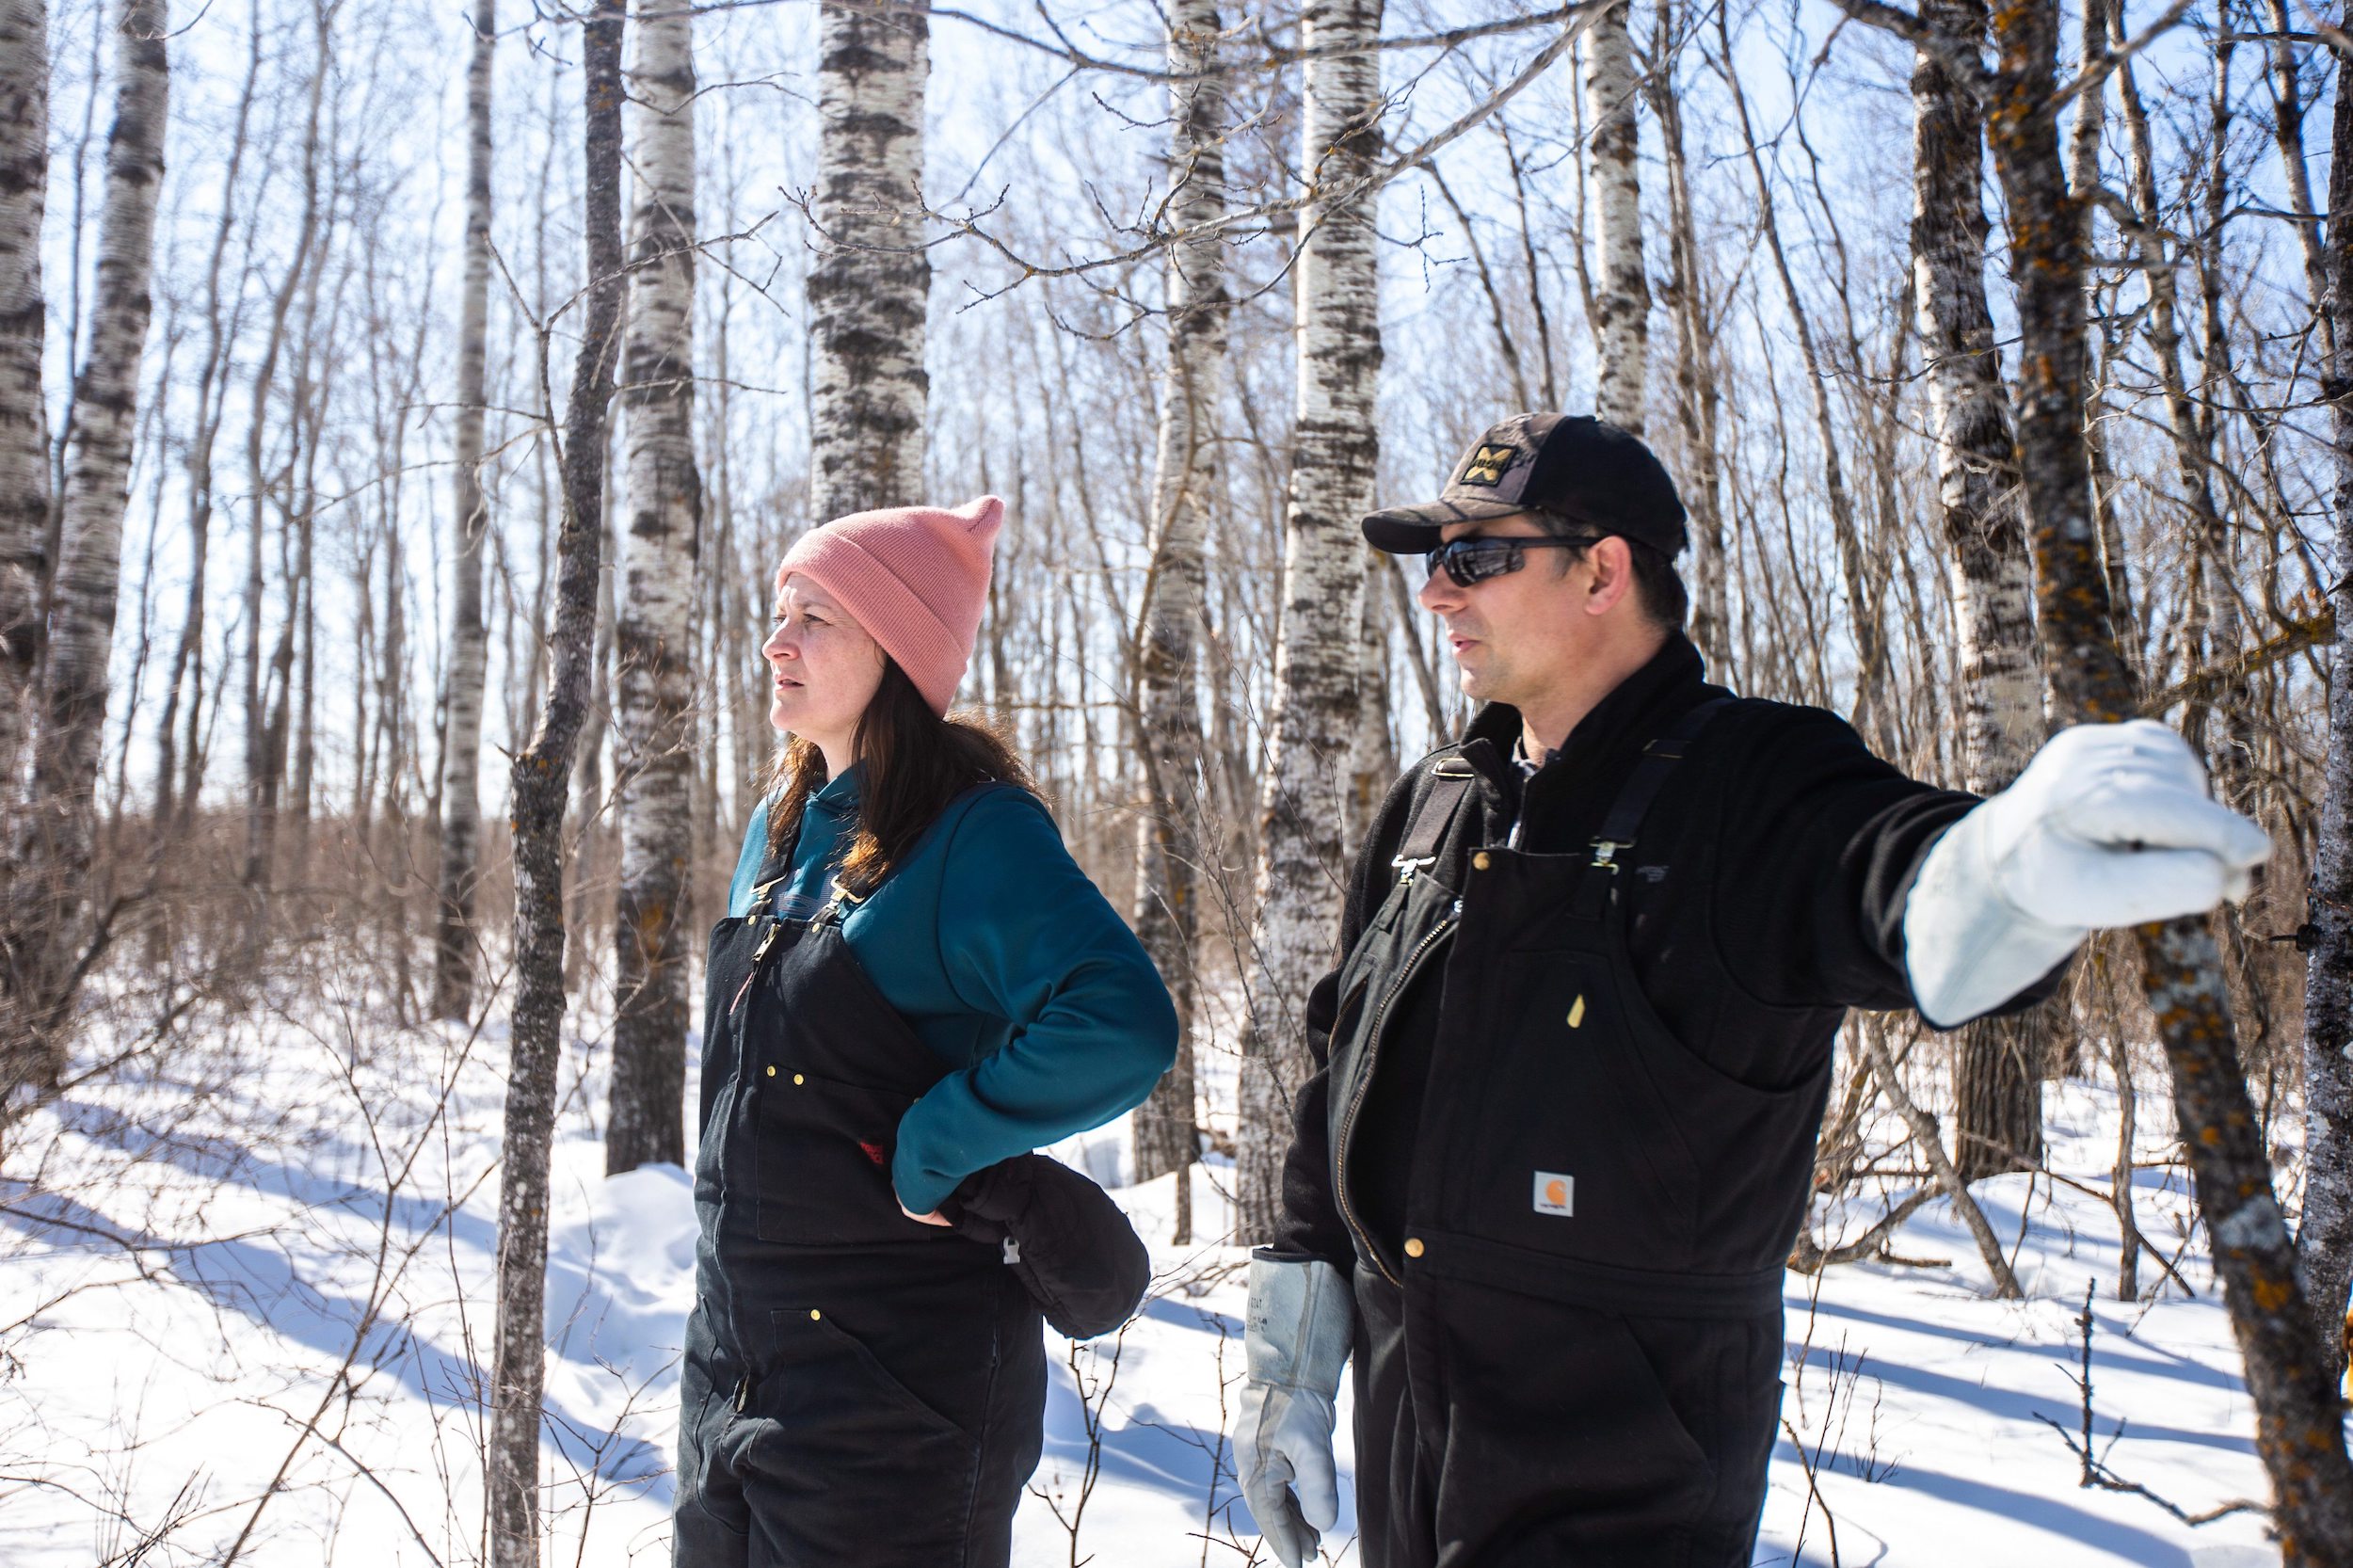 Josh and Georgina Mustard stand in the snowy woods at the back of their property near Vivian, Manitoba. Josh leans against a tree as they both look toward the clearing where Sio Silica plans to build a sand processing facility